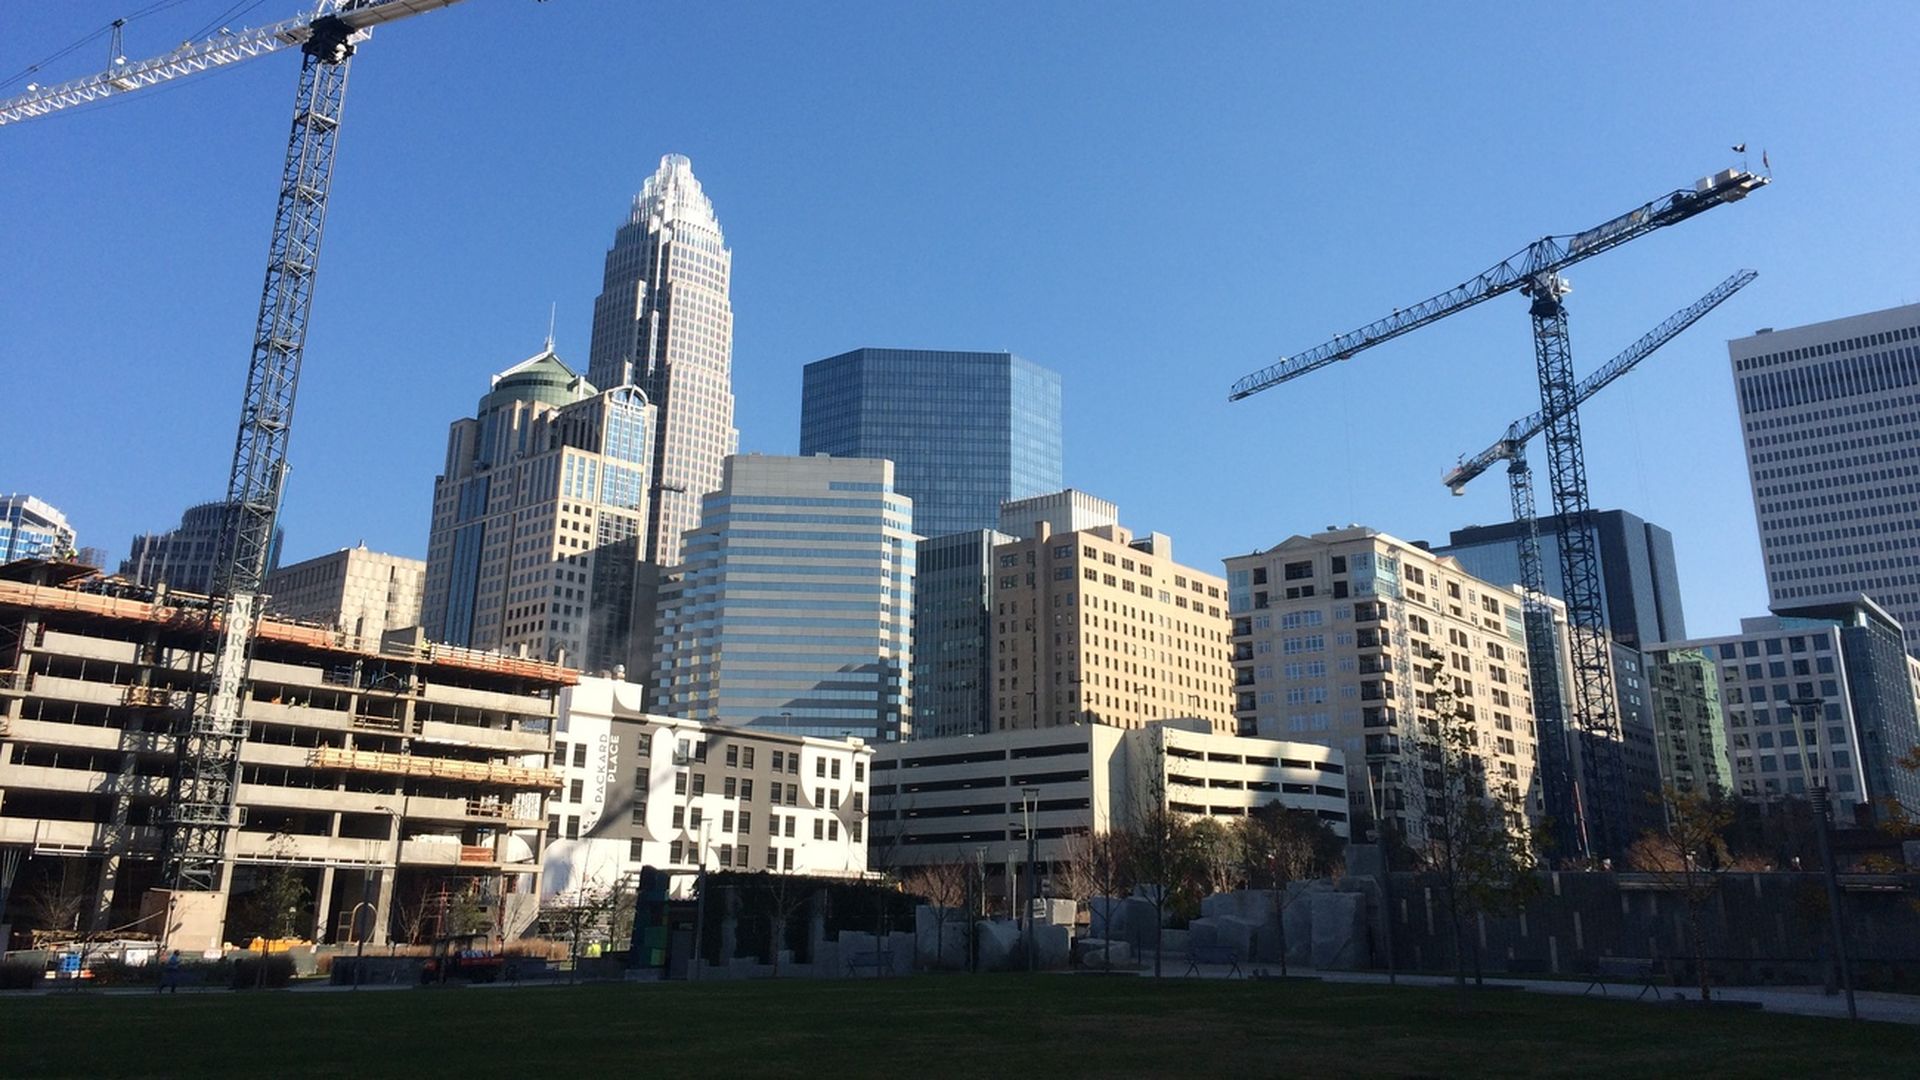 Charlotte is planning for 2040. What does that mean for today? - Axios  Charlotte